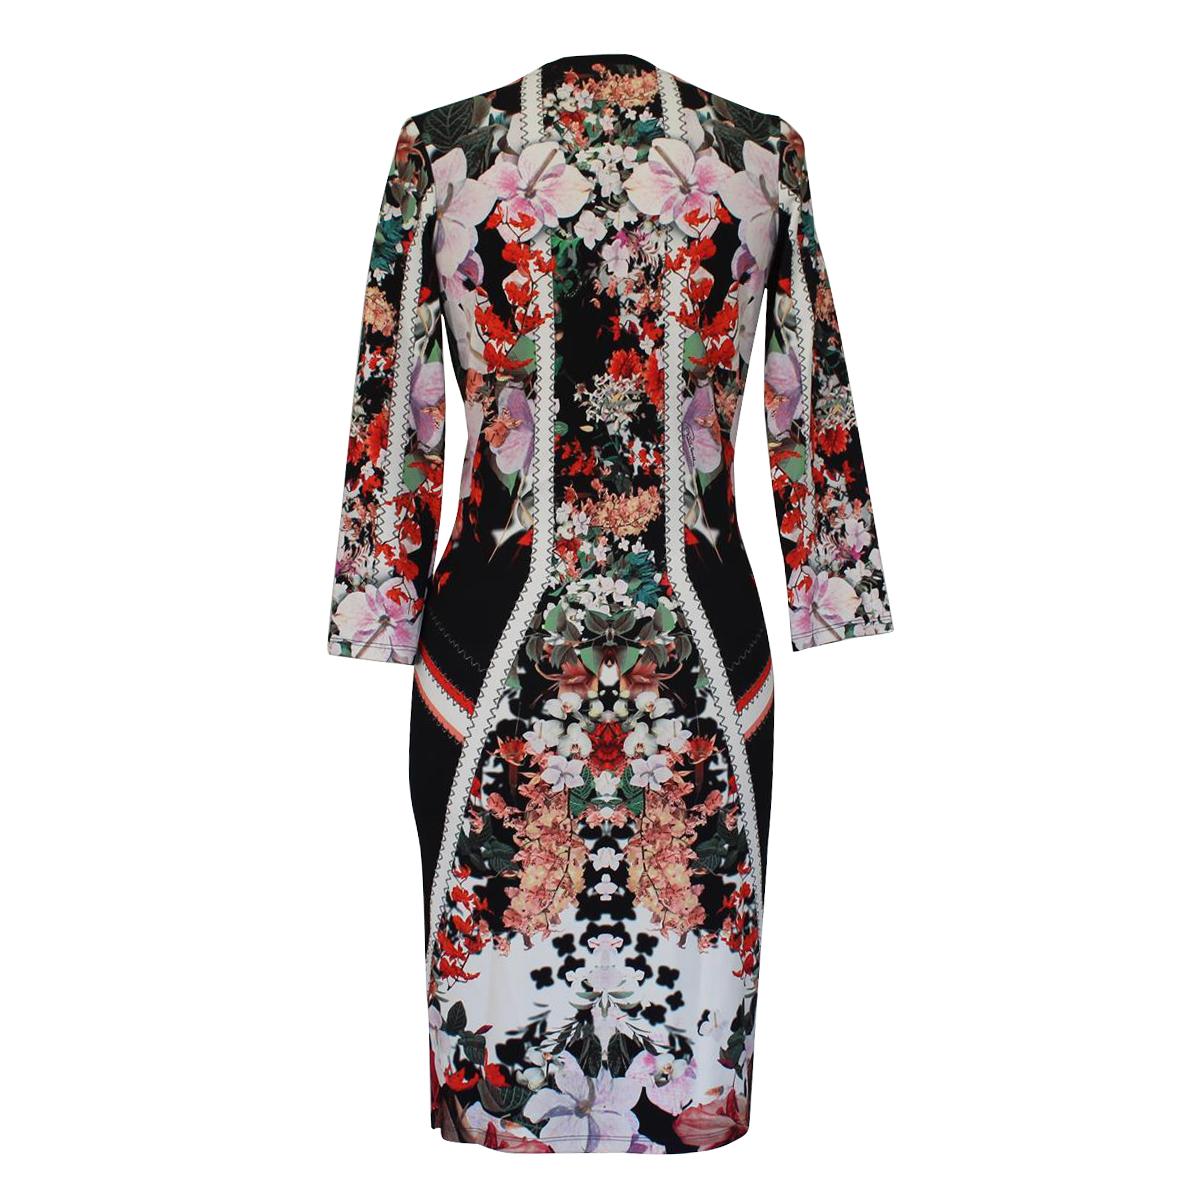 Wonderful Roberto Cavalli printed dress
Viscose (96%) and elasthane
Floral print
Multicolored
Long sleeve
Total lenght (shoulder/hem) cm 90 (35.4 inches)
Shoulder cm 37 (14.5 inches)
Worldwide express shipping included in the price !